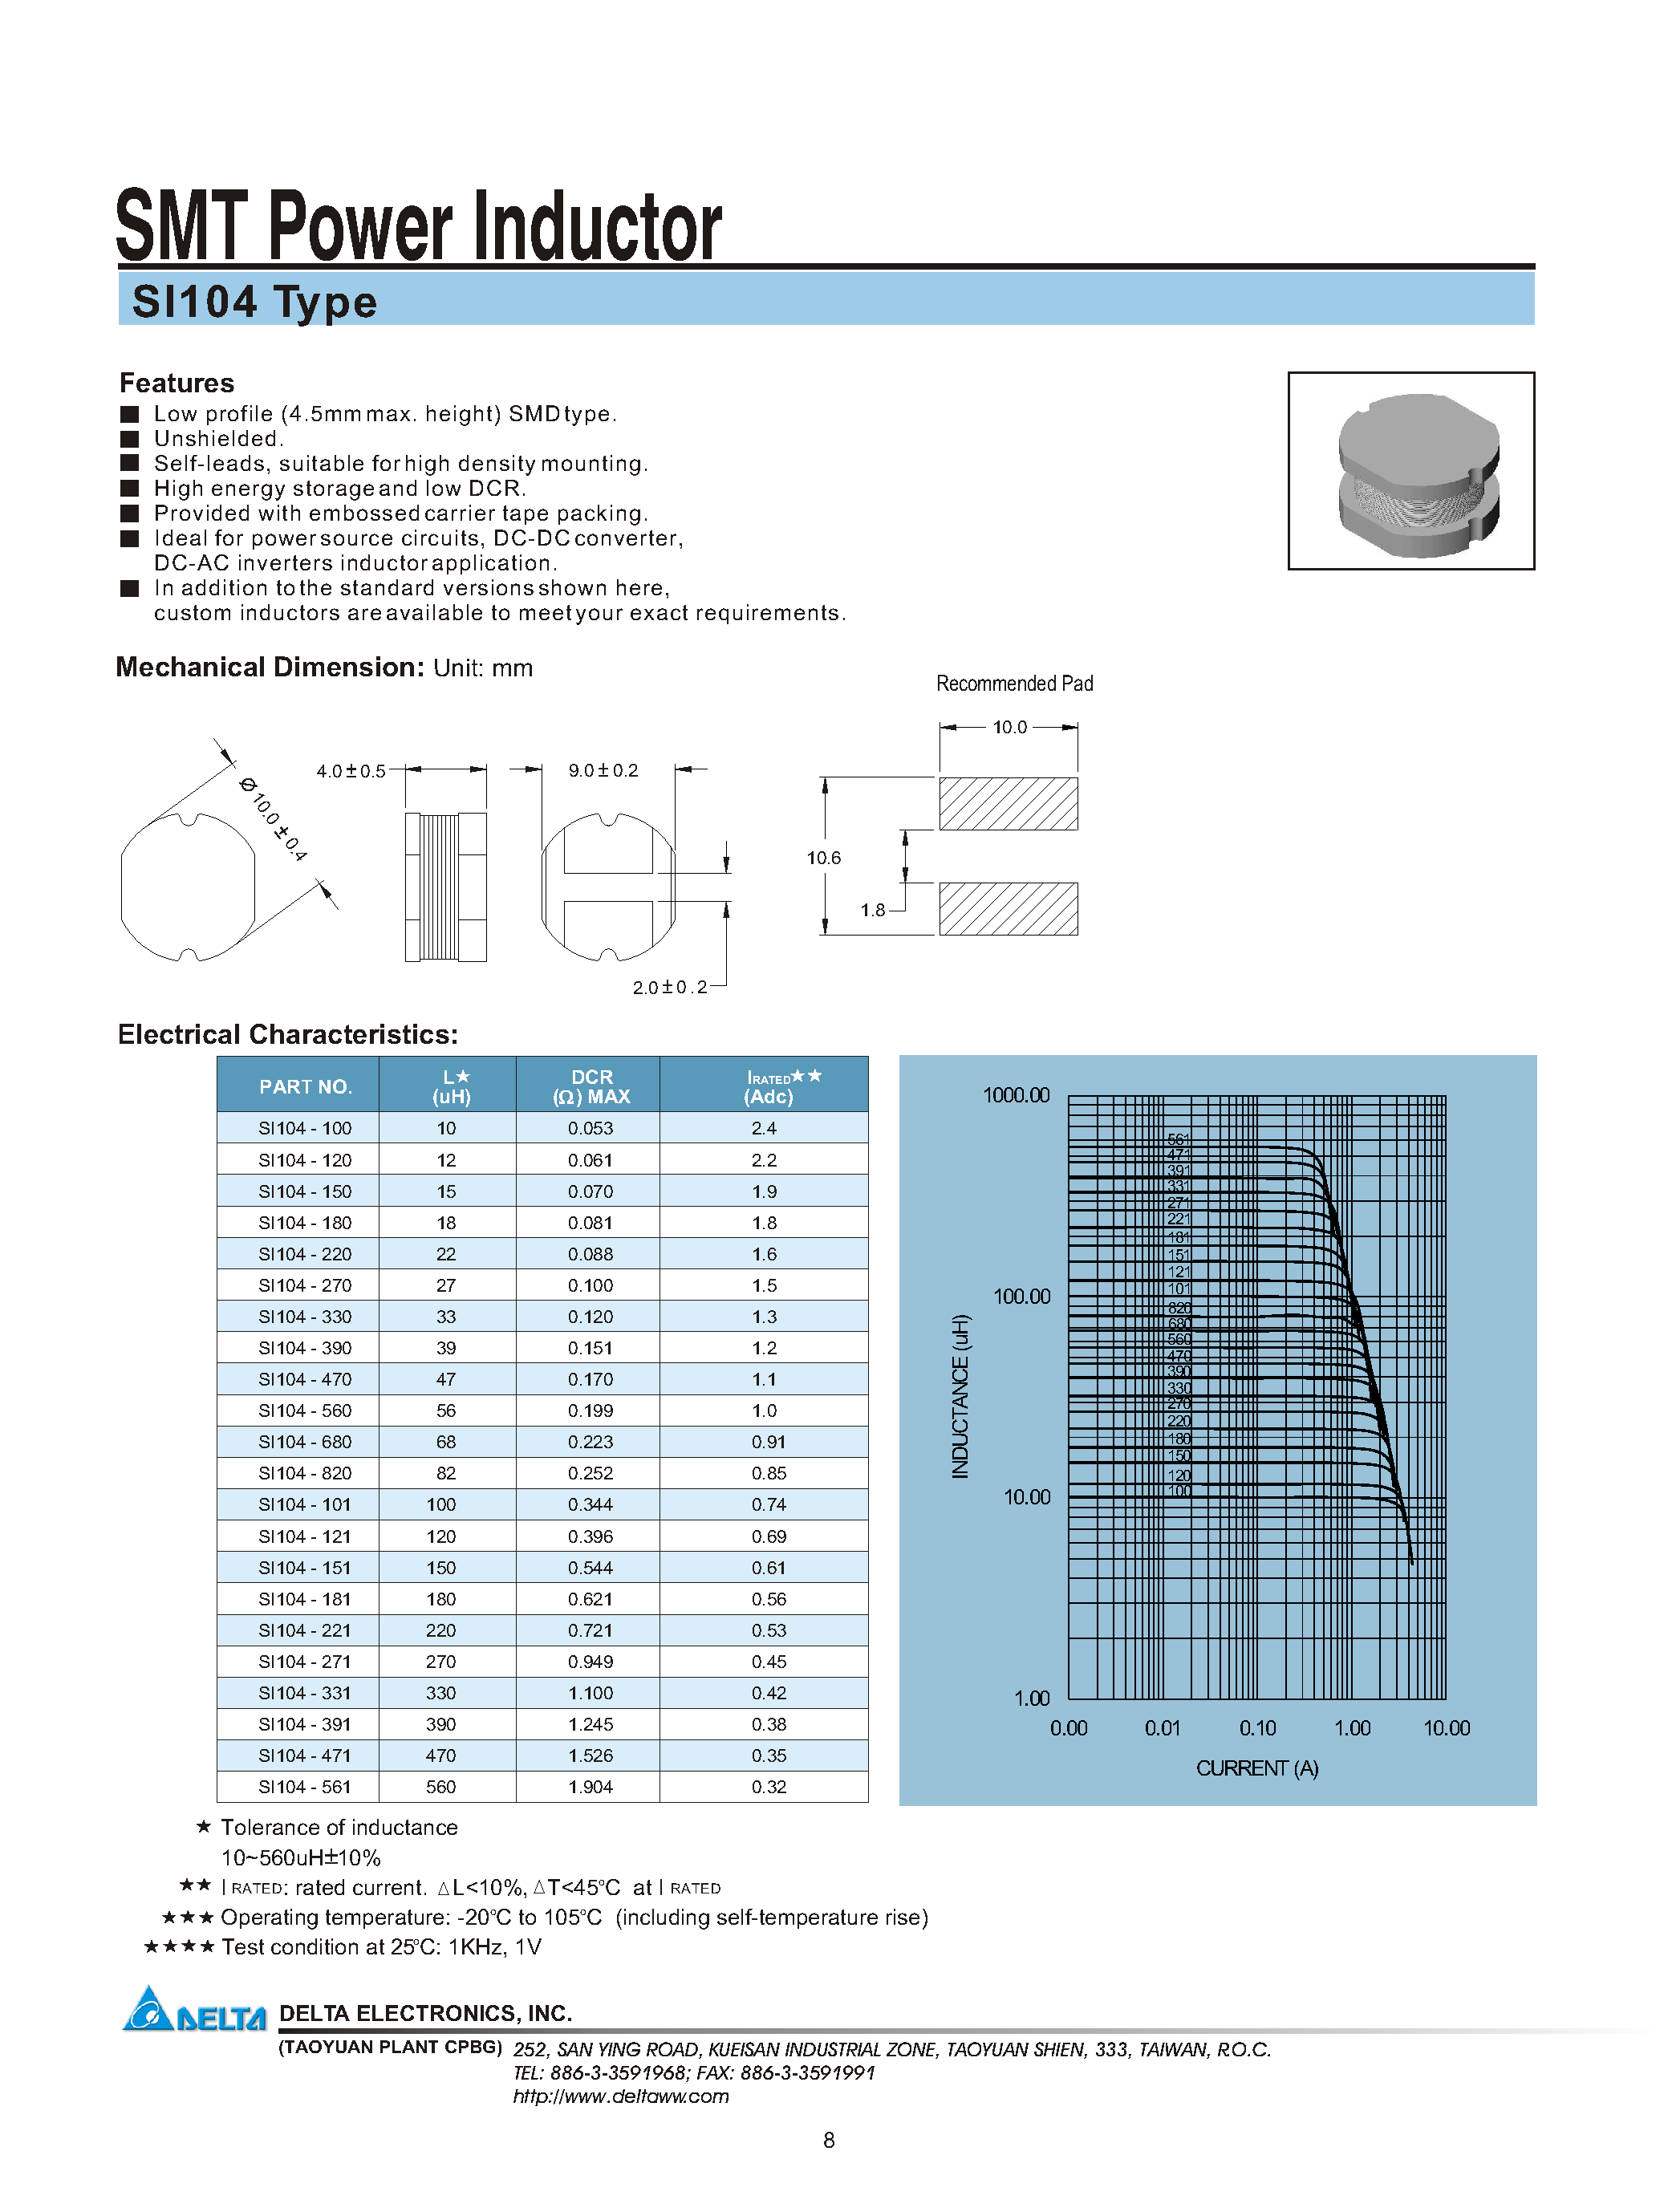 Datasheet SI104 - SMT Power Inductor page 1